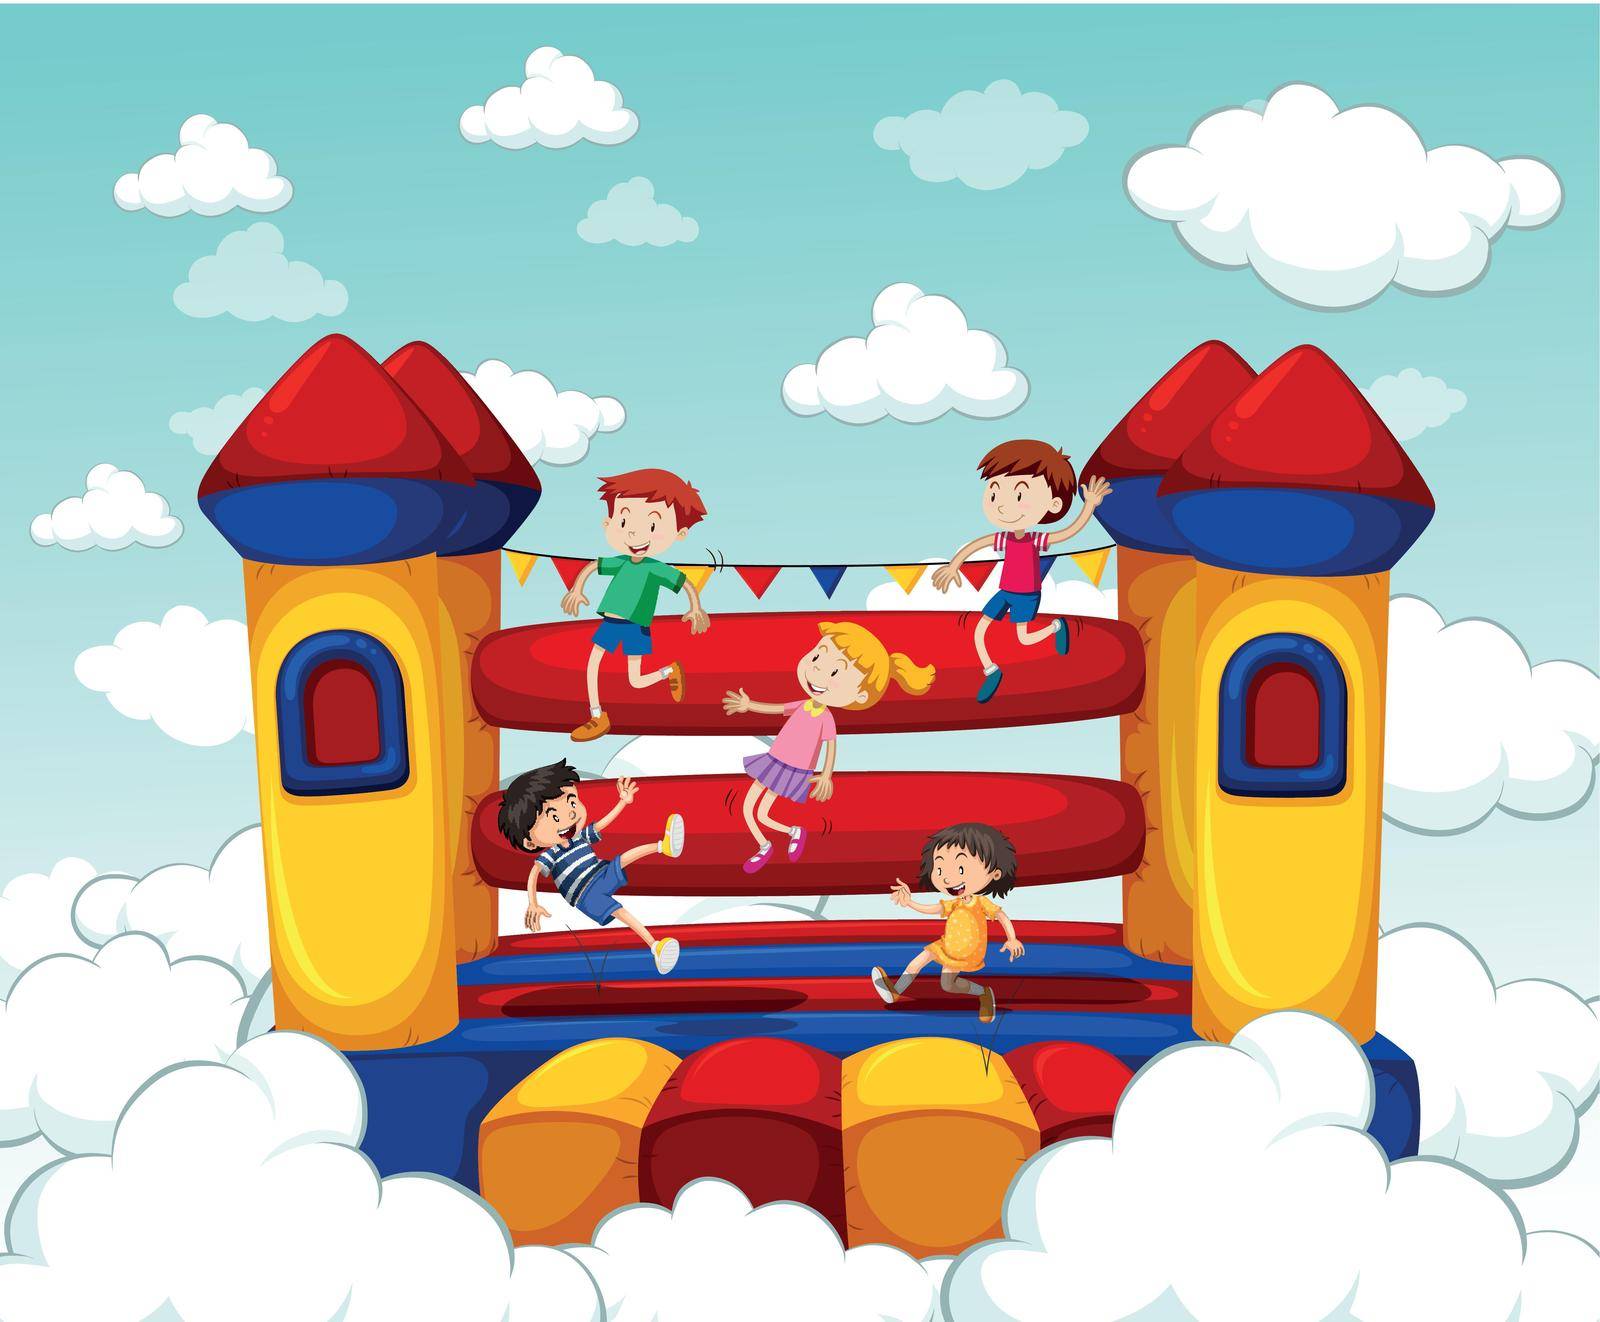 Children bouncing on rubber house by iimages